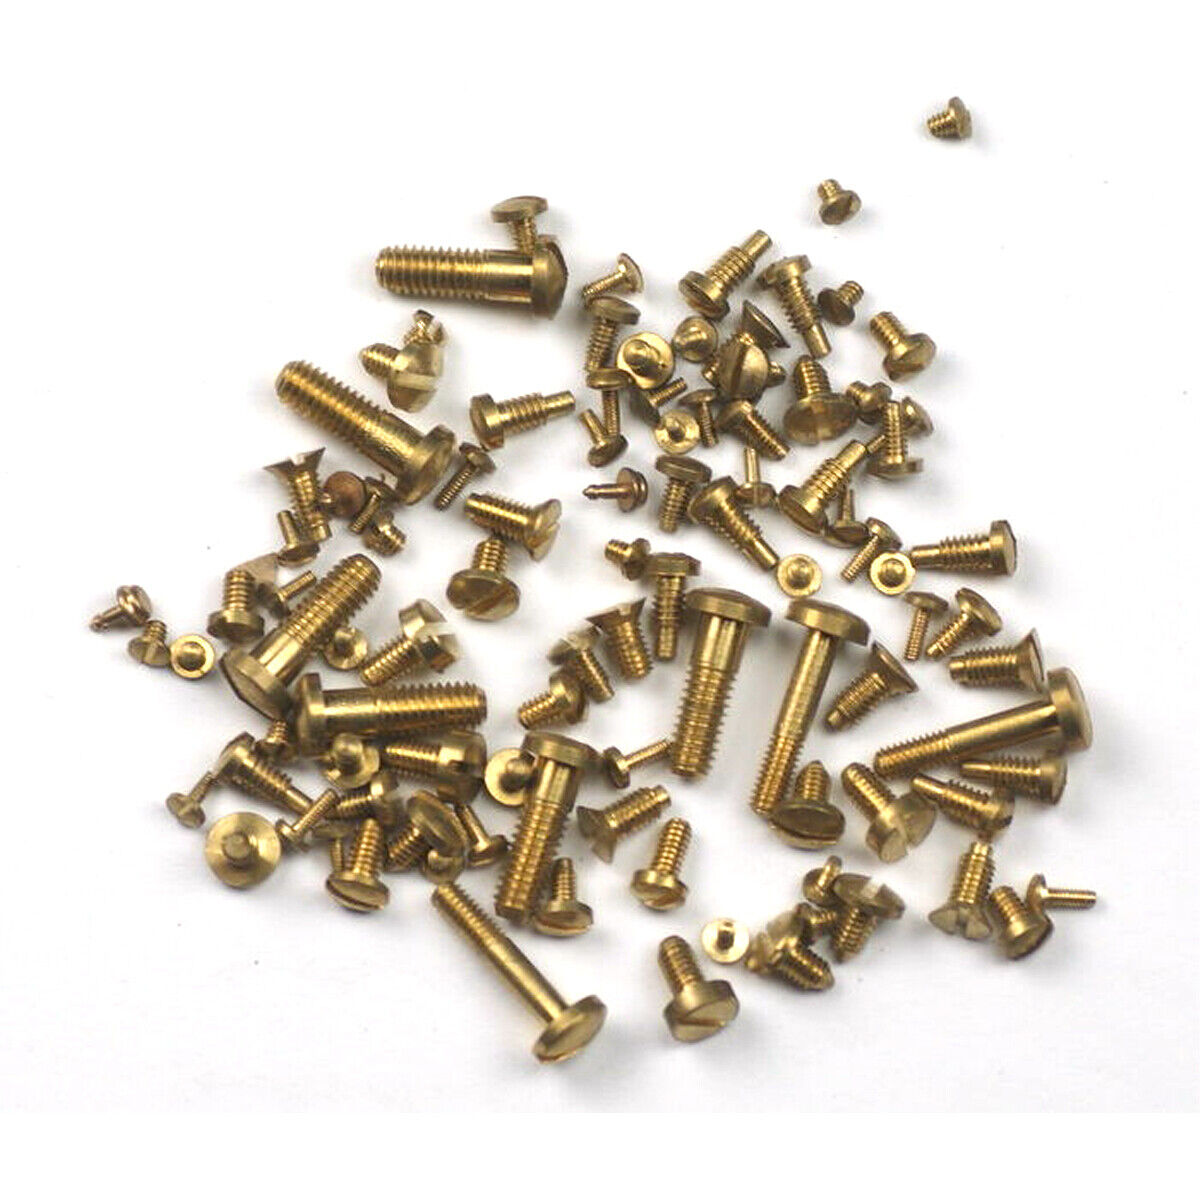 Clock screws x100 assorted BRASS for movements cases bells spares/repairs